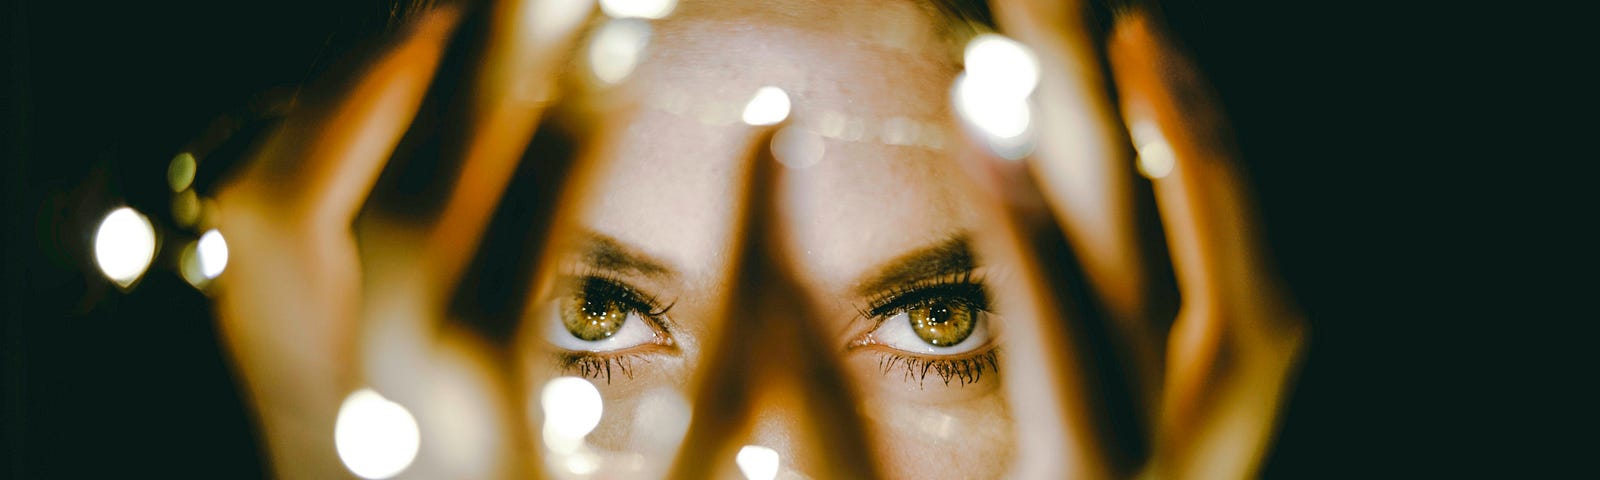 Photo: Image of a woman with hands to her face with twinkling lights.